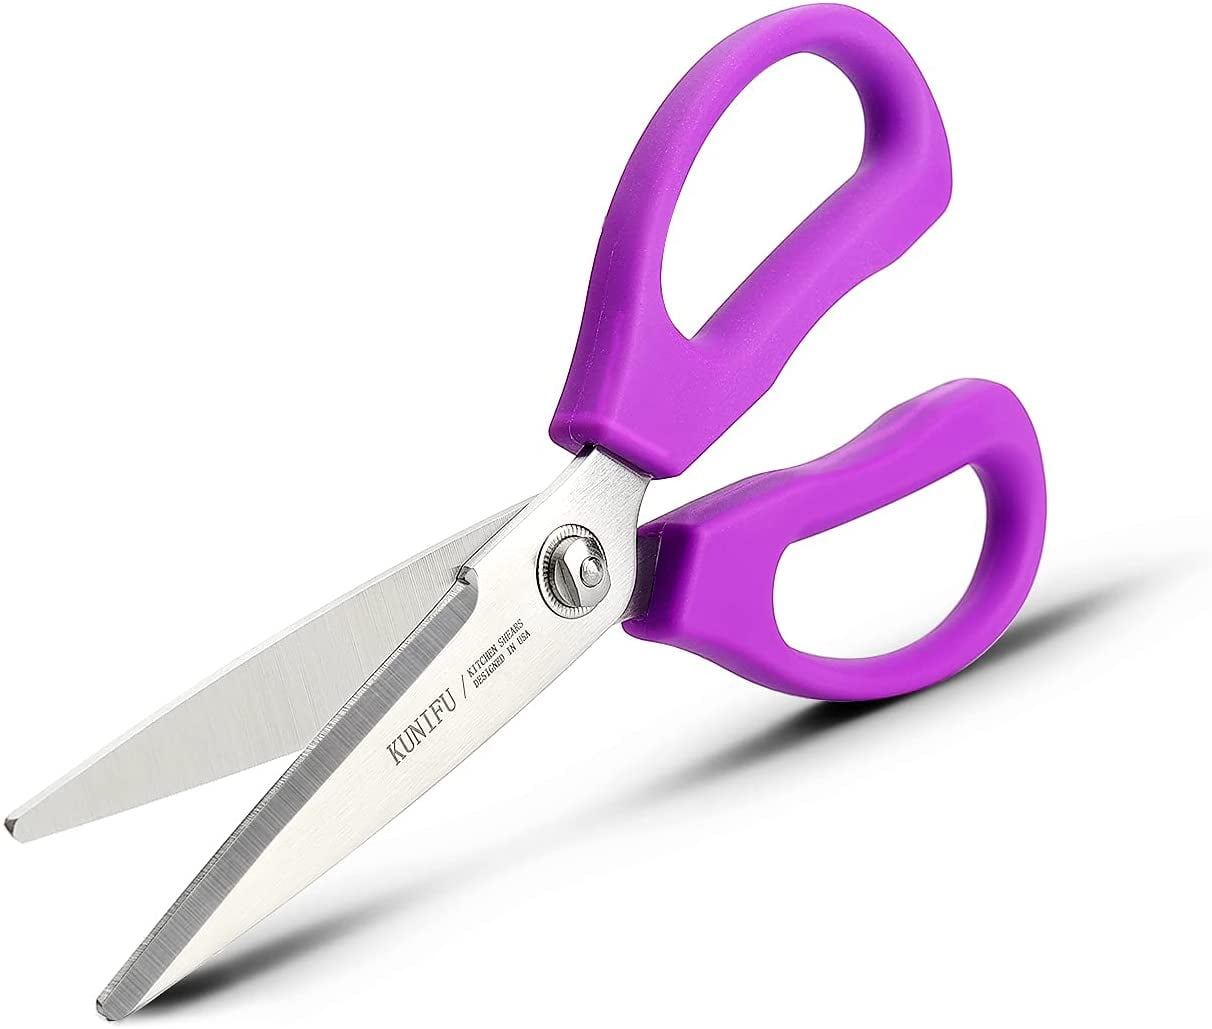 Aoibox 2-Piece All Purpose Heavy Duty Meat Scissors Poultry Shears, Stainless Steel Kitchen Shears, Pastel Pink - Soft Purple